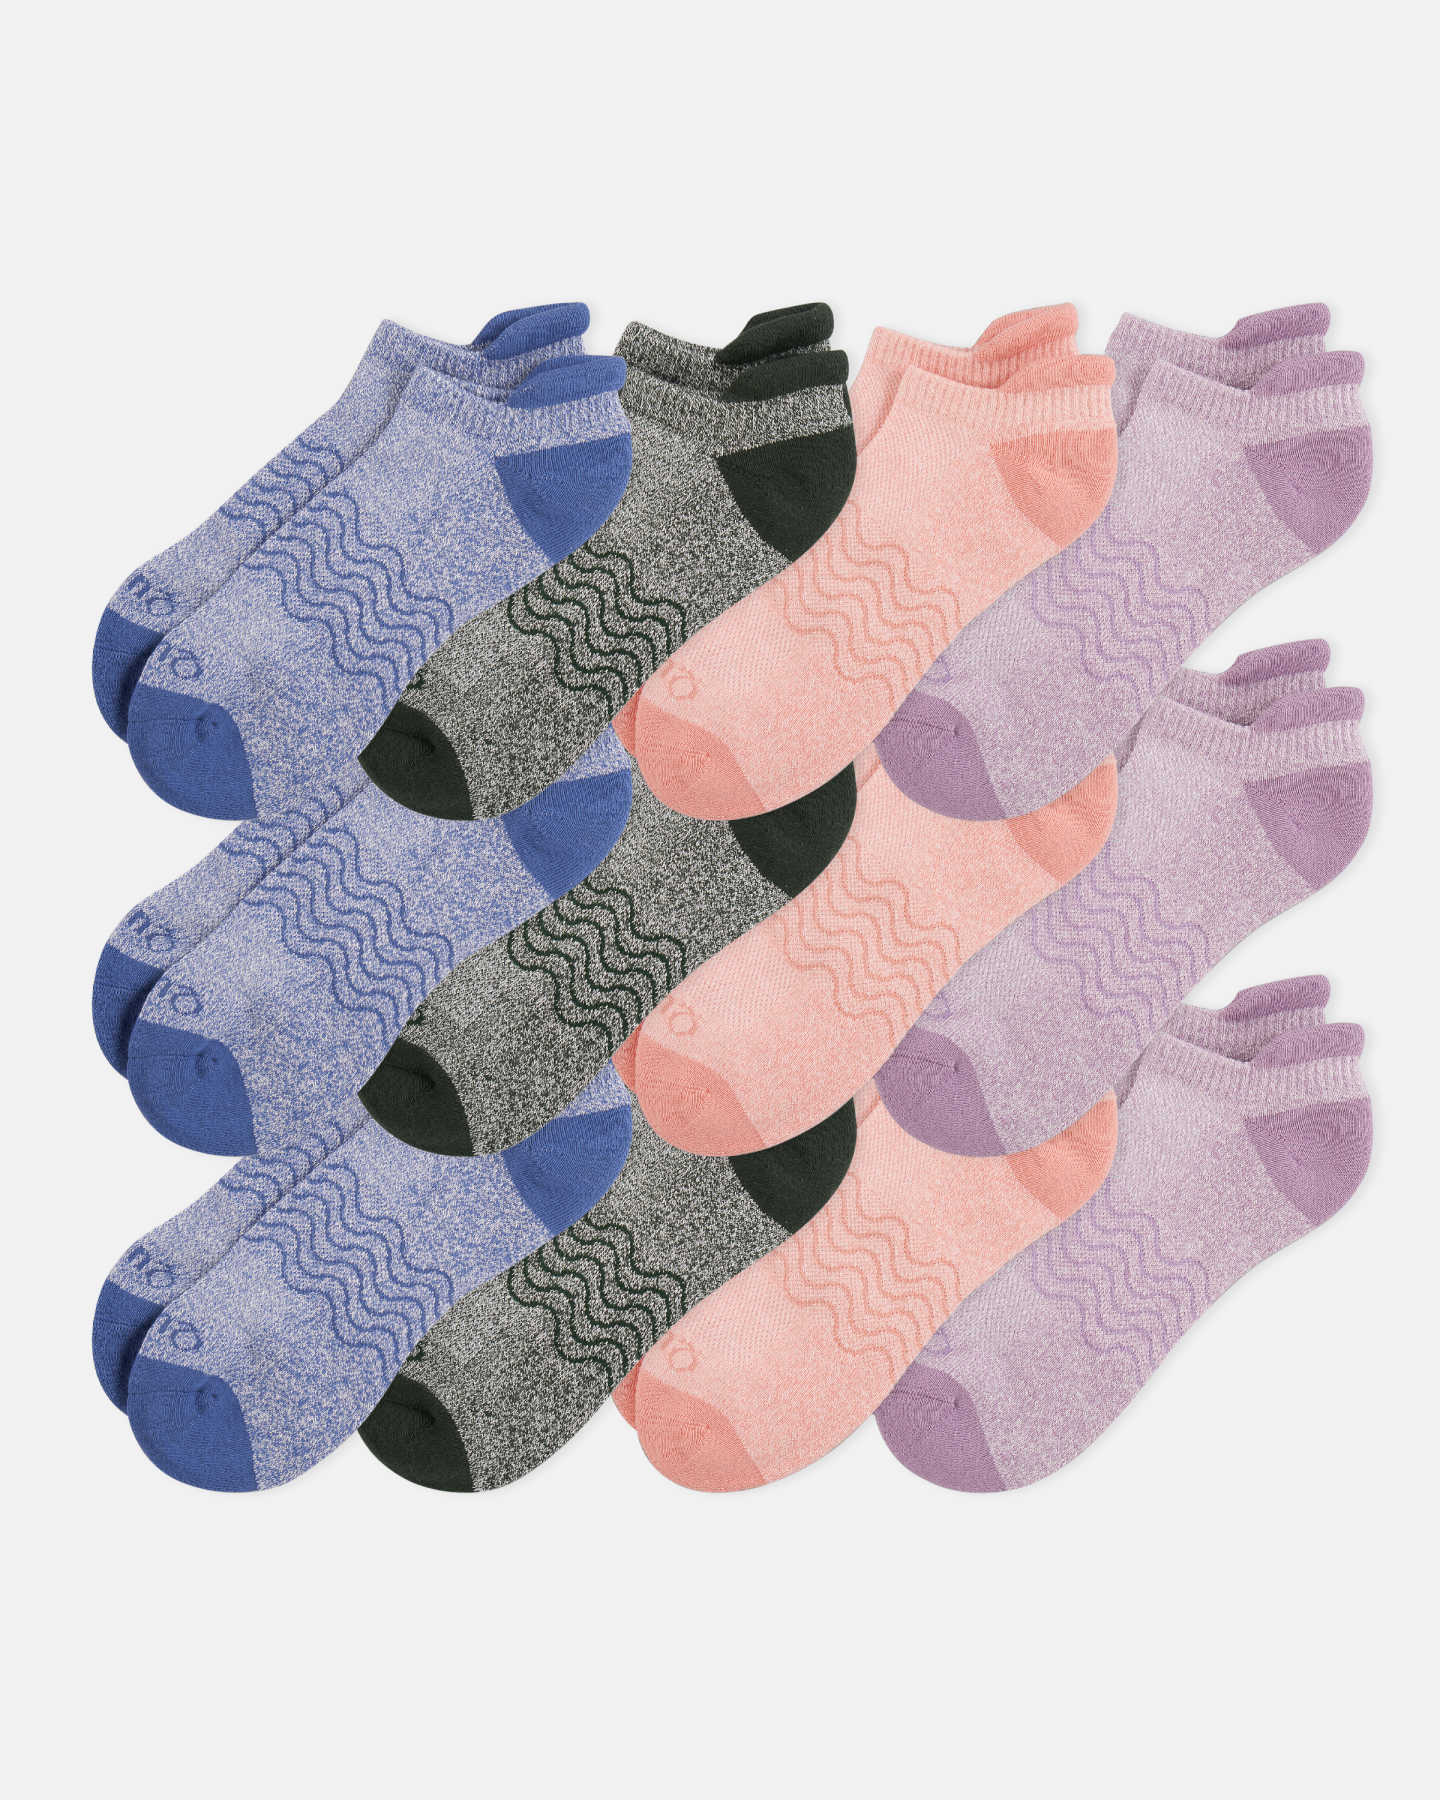 You May Also Like - Organic Colorblock Marl Ankle Socks (12-pack) - Pink/Blue/Purple Mix